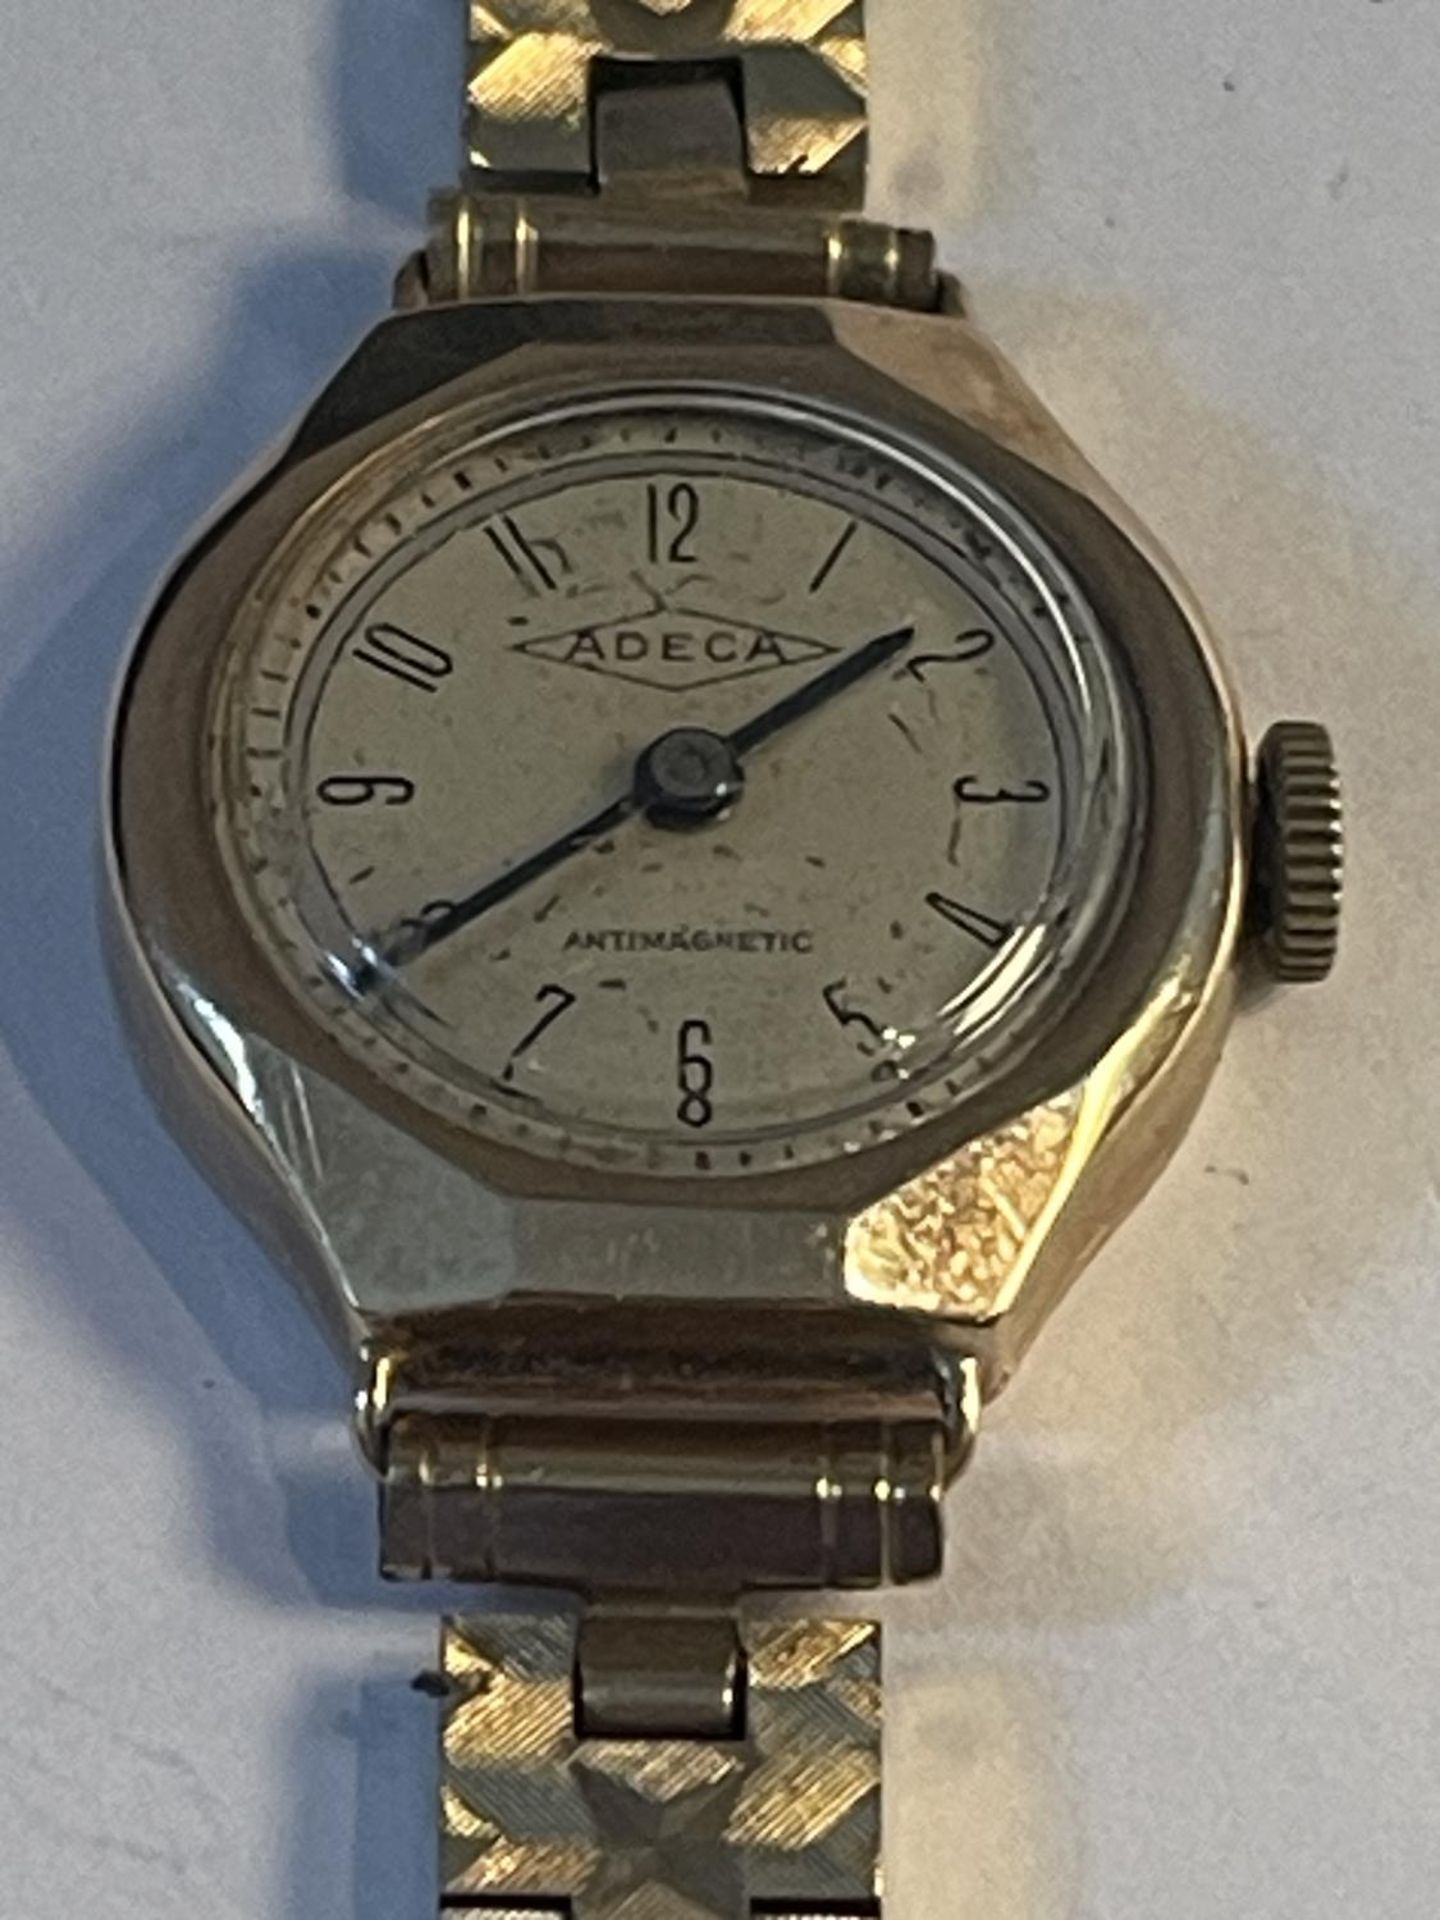 A 9 CARAT GOLD ADECA AUTOMATIC WRIST WATCH WITH GOLD PLATED STRAP - Image 2 of 3